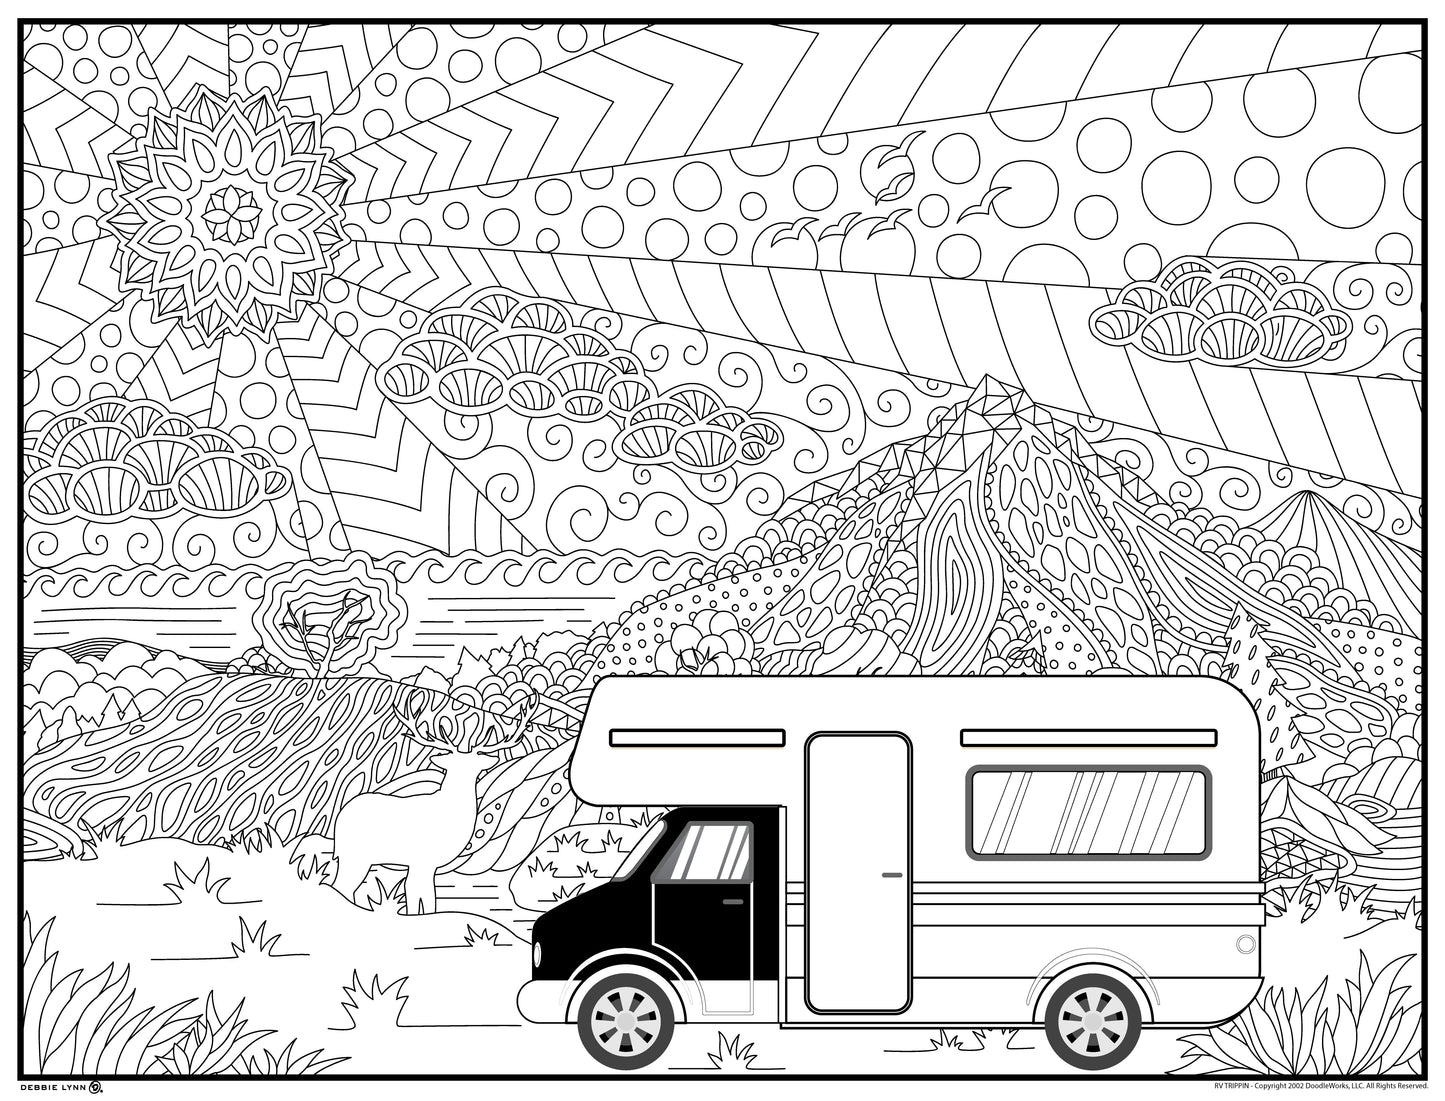 RV Trippin Personalized Giant Coloring Poster 46"x60"